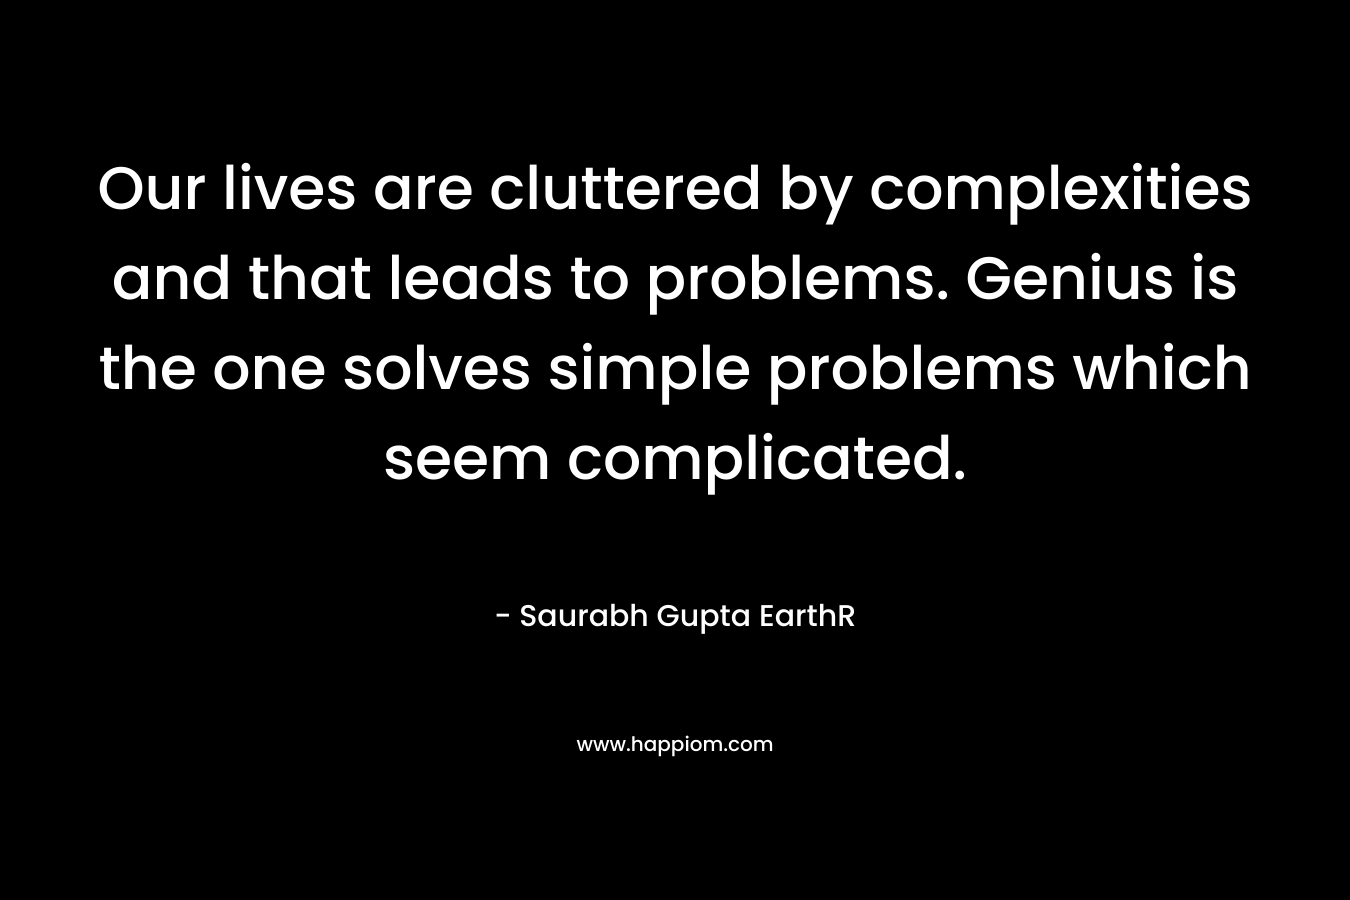 Our lives are cluttered by complexities and that leads to problems. Genius is the one solves simple problems which seem complicated.